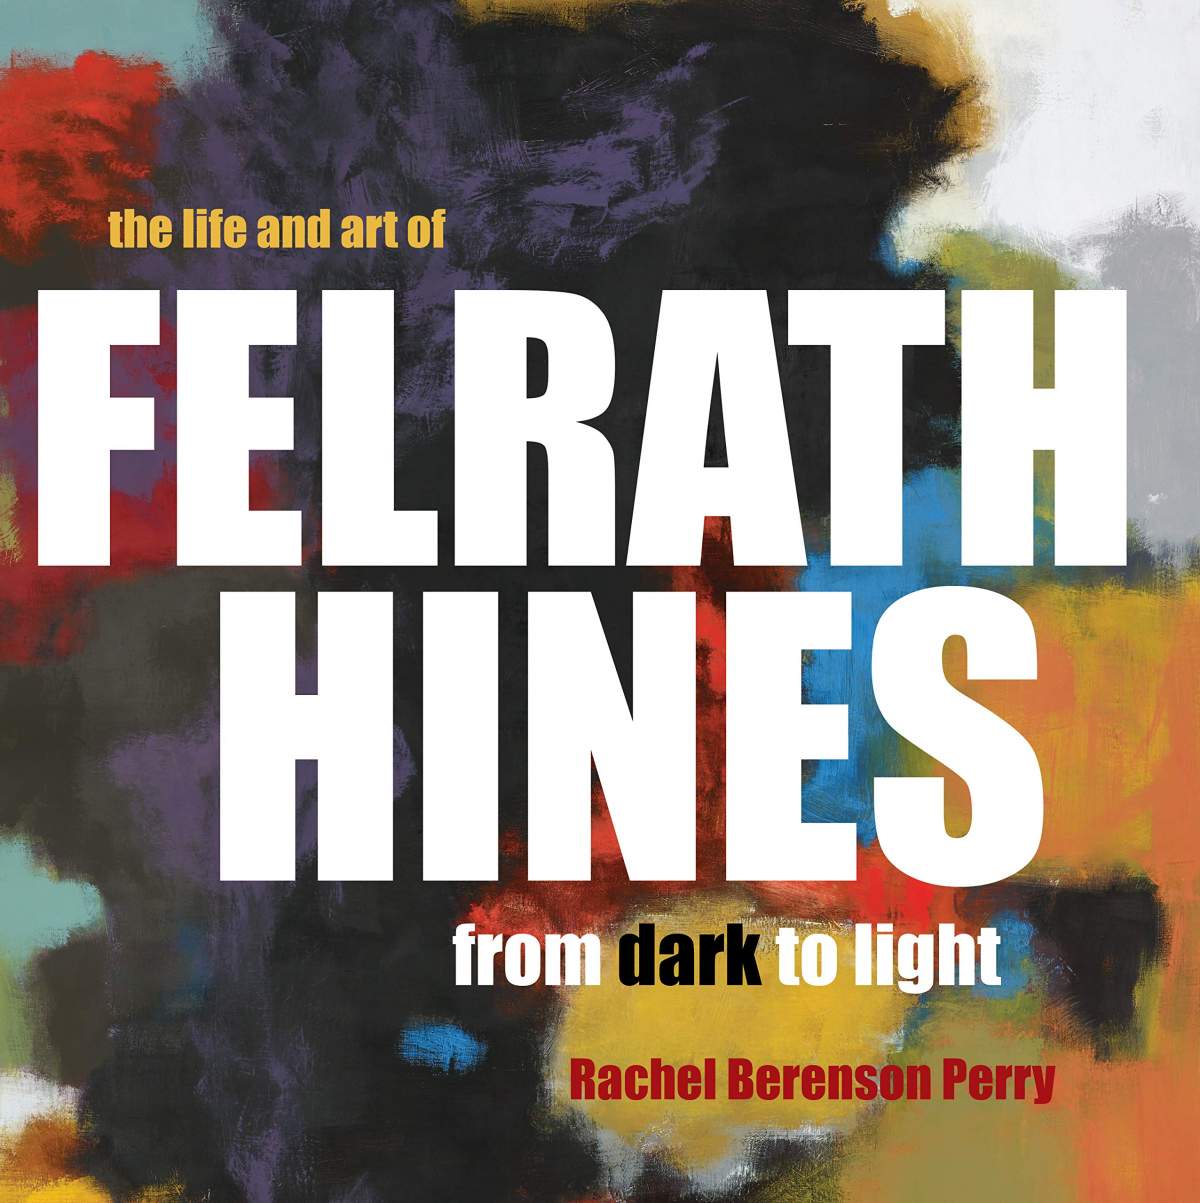 Rachel Berenson Perry's new book illuminates Hines' struggles and ultimate aesthetic success as a 20th-century African-American artist.